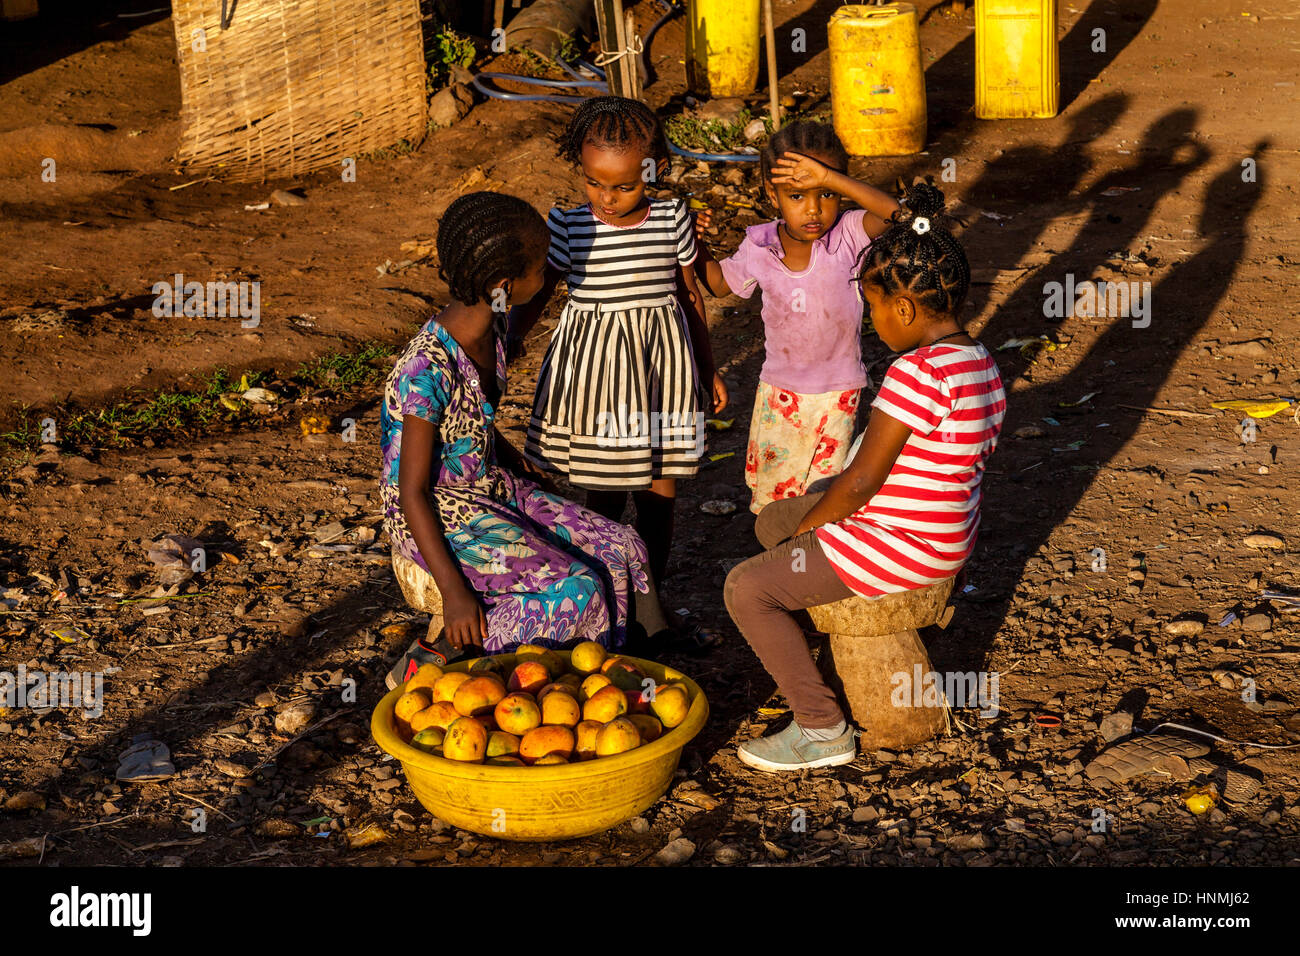 Local Children Selling Mangoes By The Side Of The Road, Arba Minch, Ethiopia Stock Photo